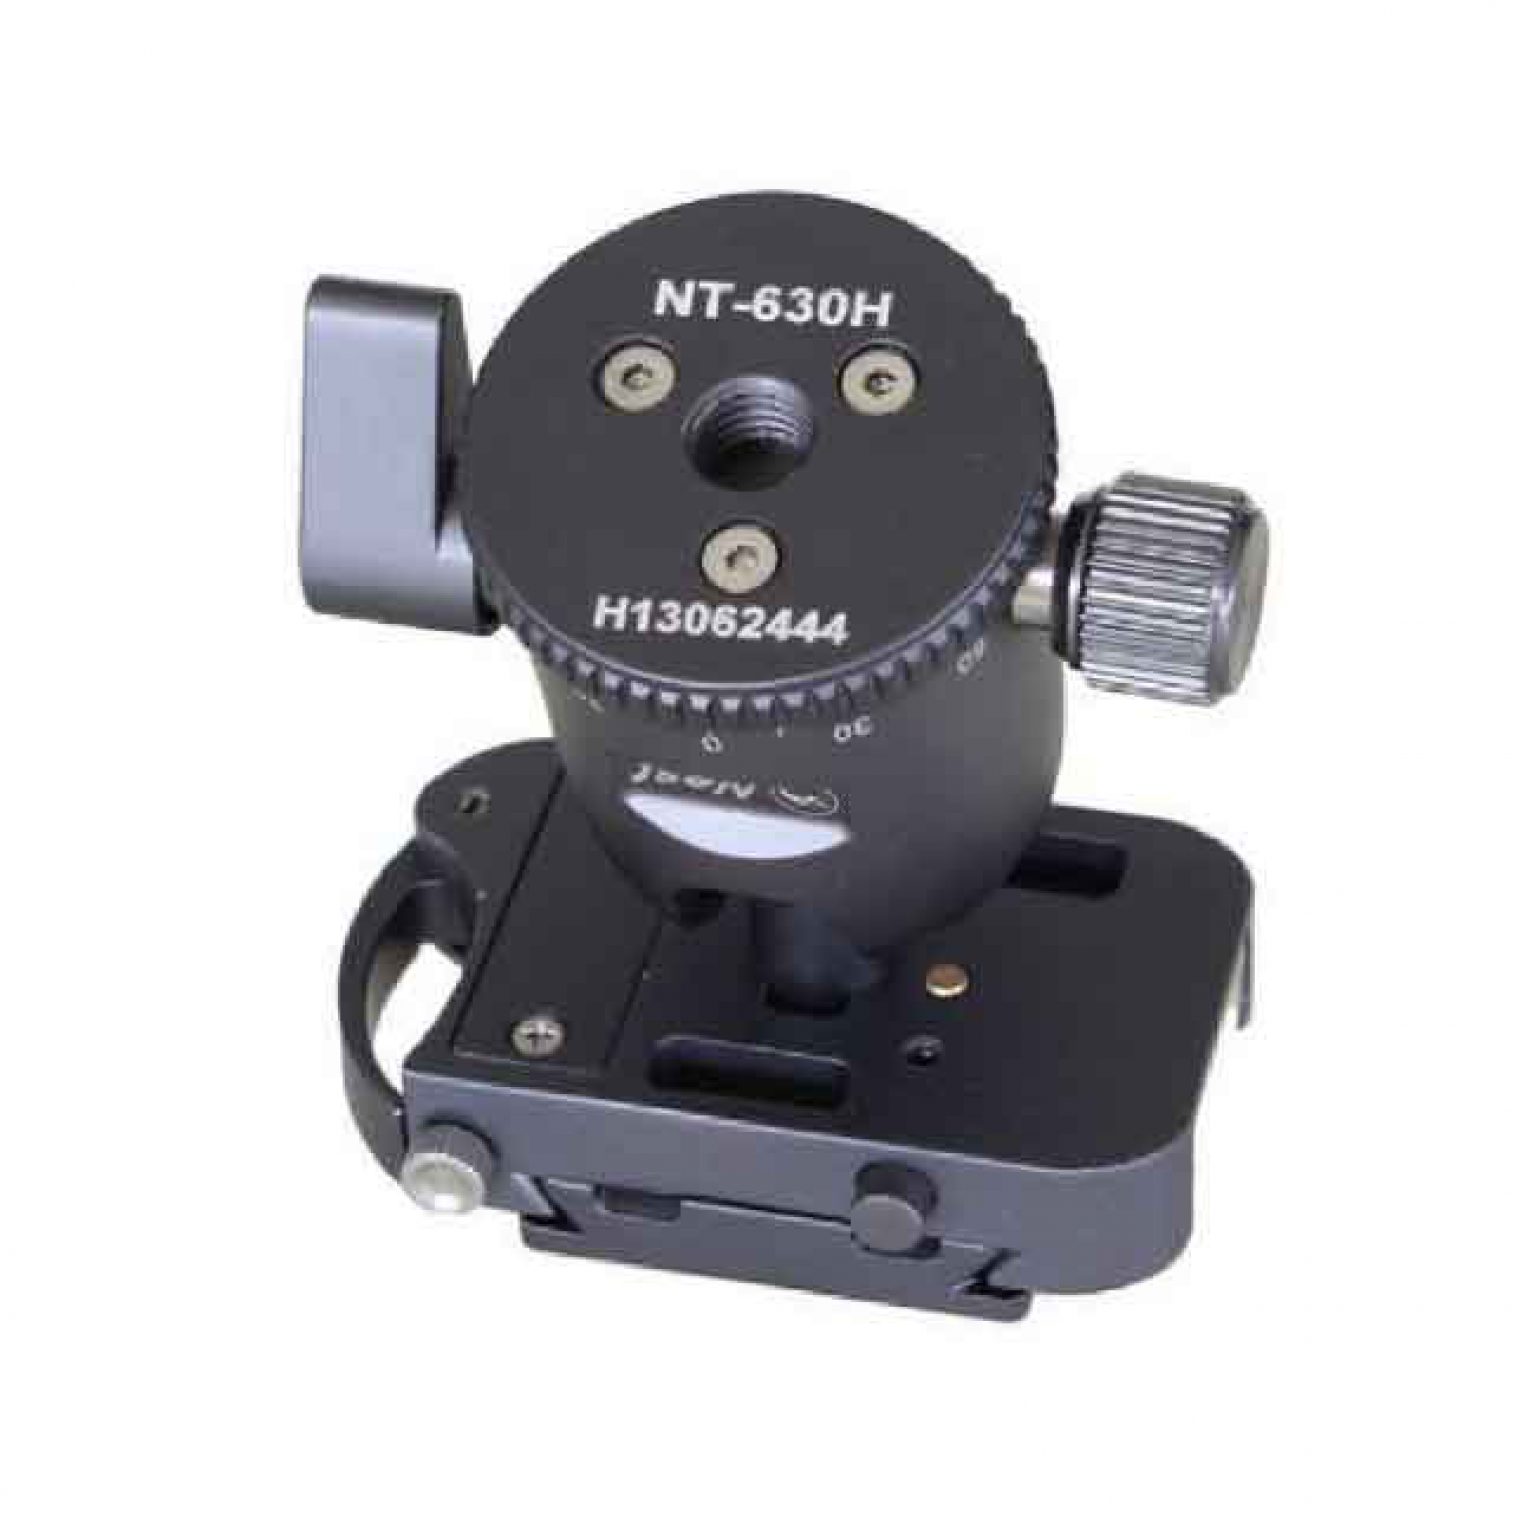 NEST NT 630H Professional Ball Head for nt6264 1 1 2